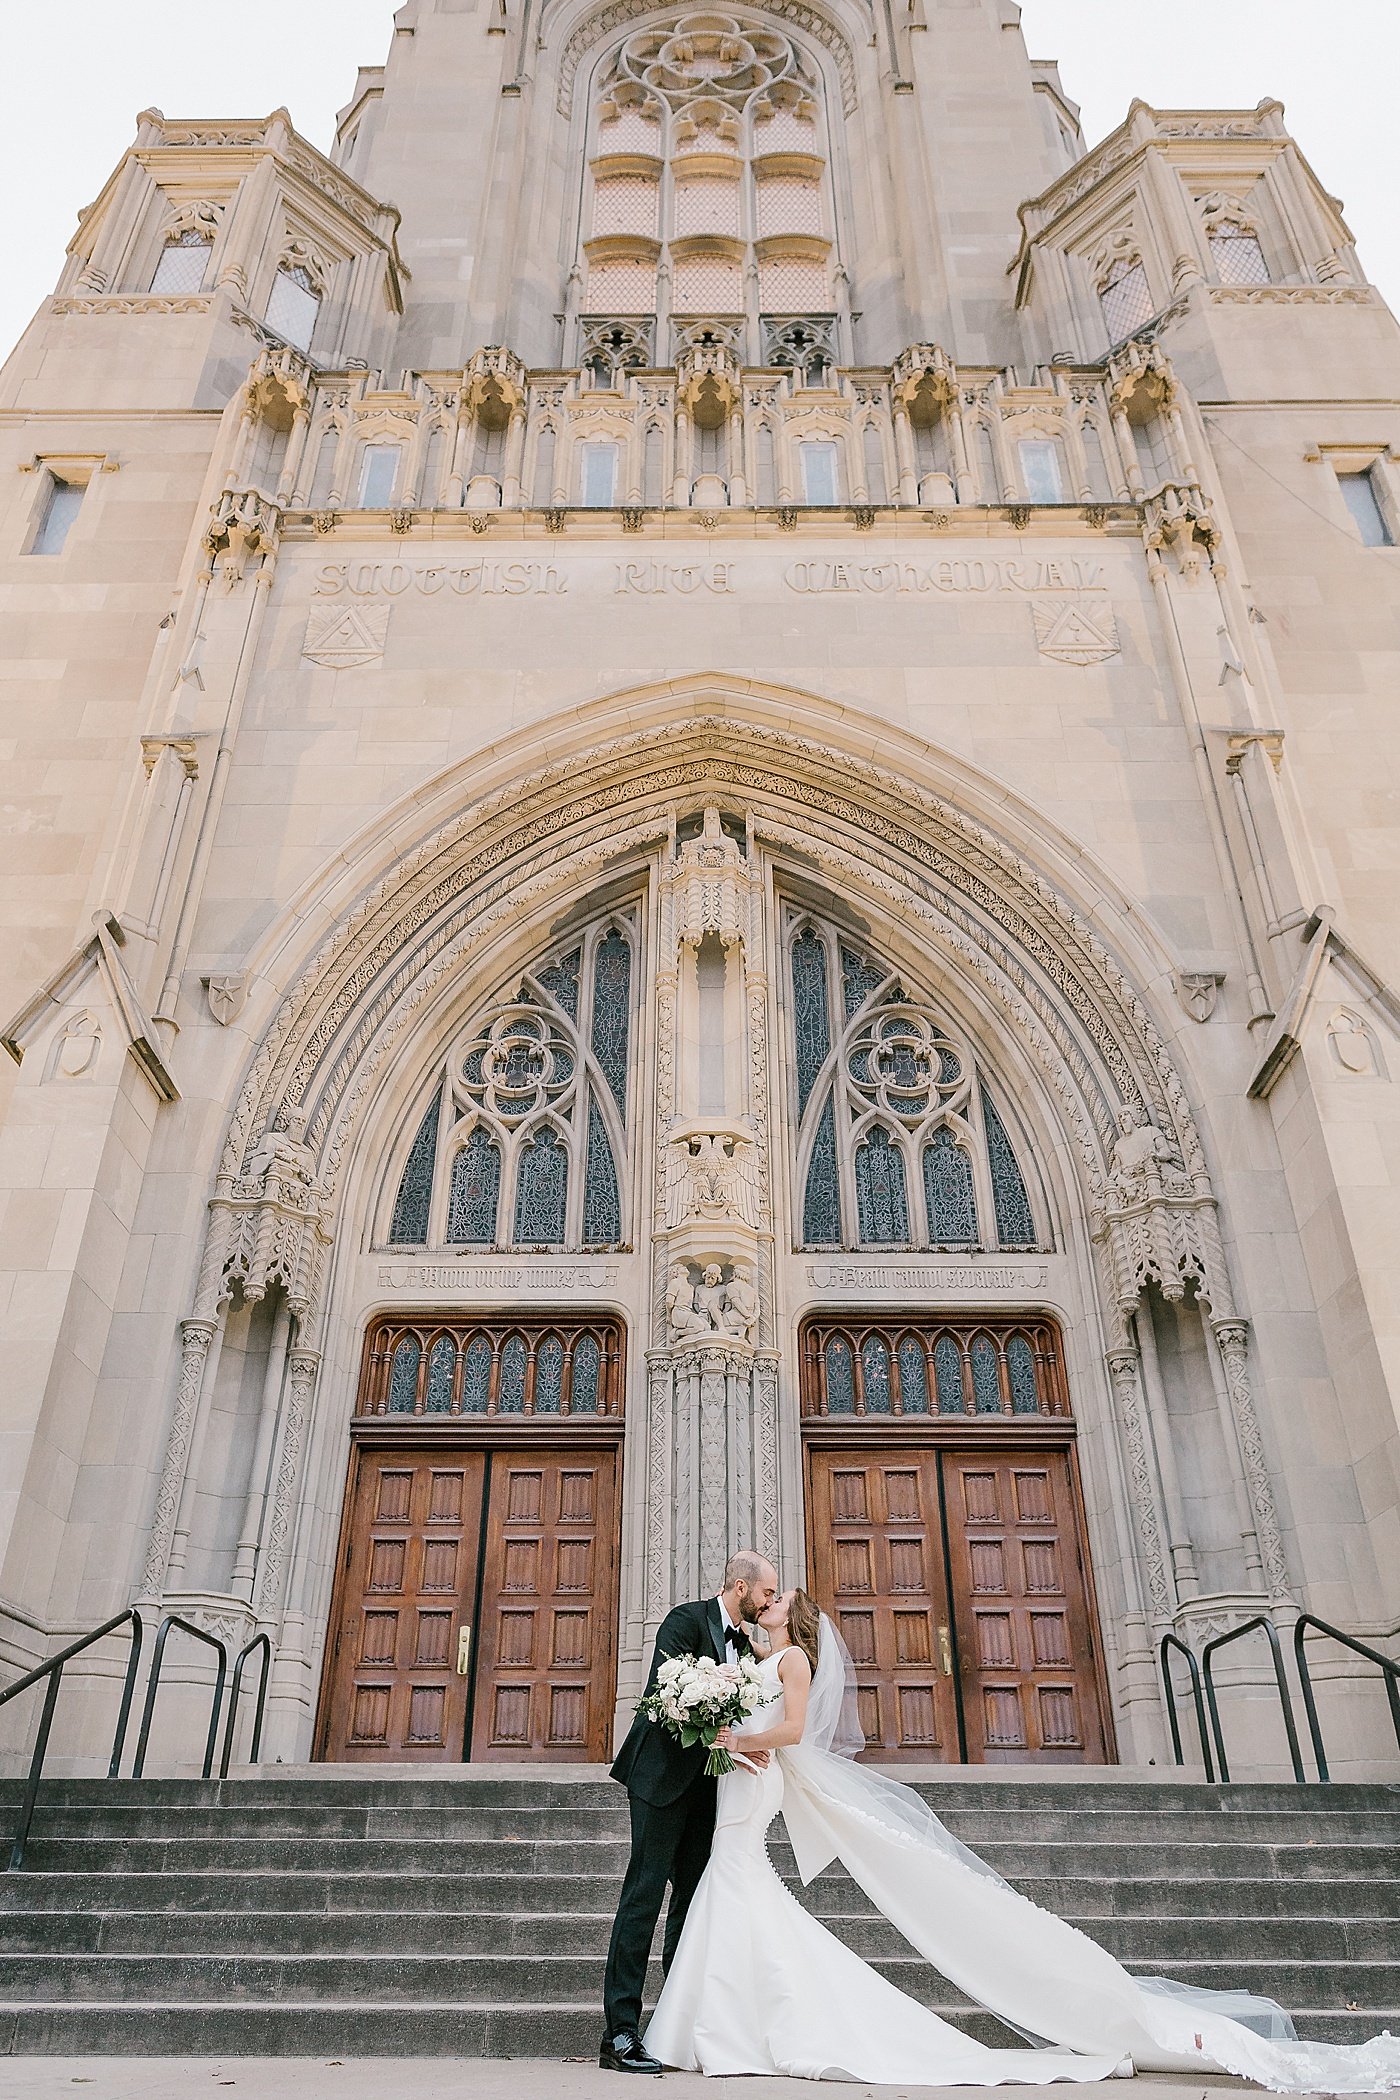 Rebecca Shehorn Photography Alex and Joey's Scottish Rite Cathedral Wedding-781.jpg